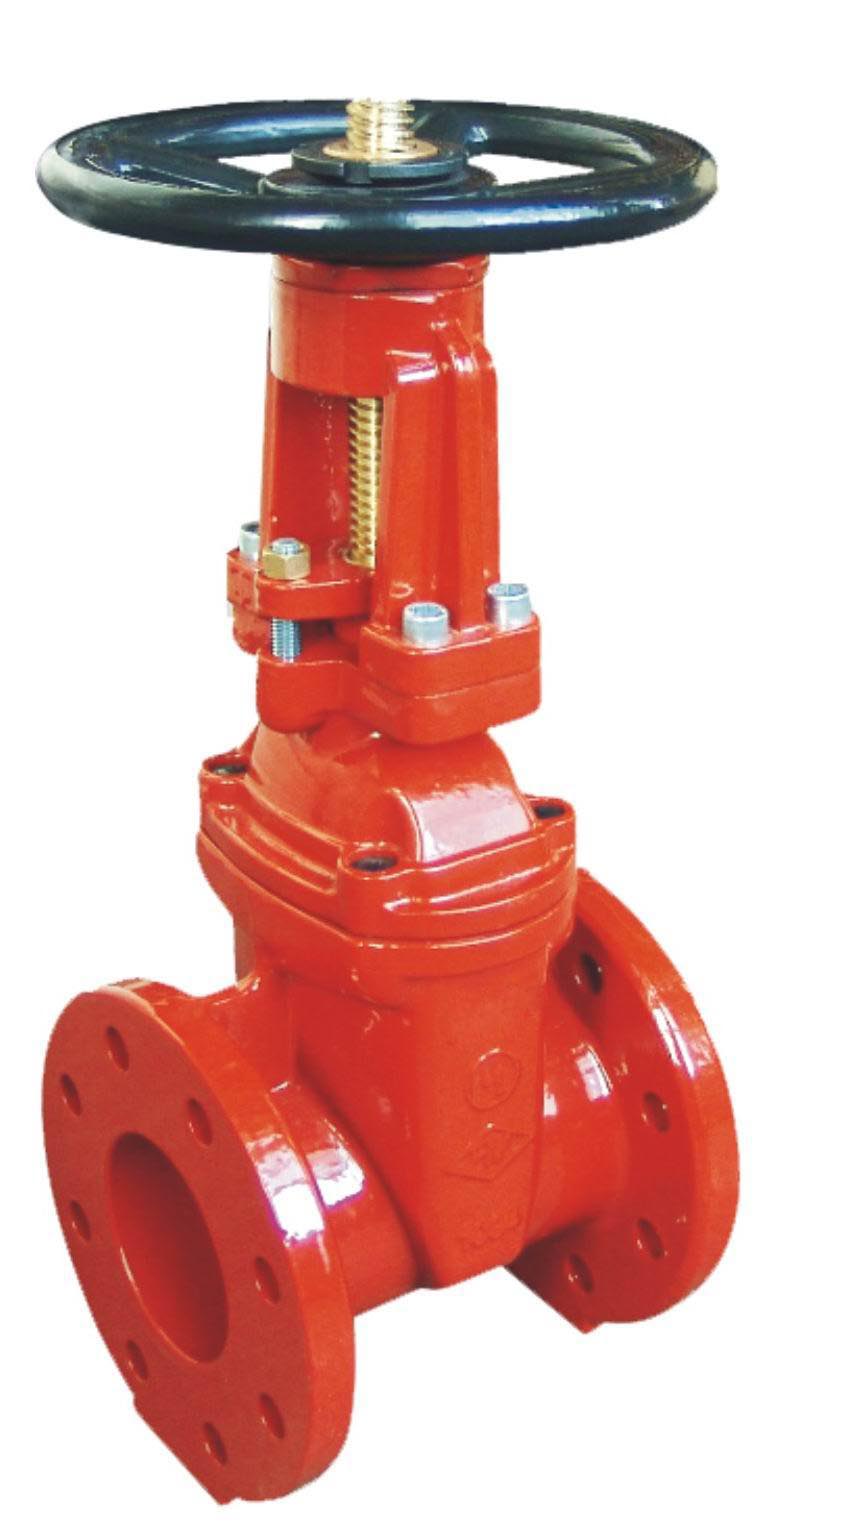 Good User Reputation for 800lbs Gate Valve -
 Flanged Ends OSY Resilient Seated Gate Valves-AWWA C509-UL FM Approval – Kingnor